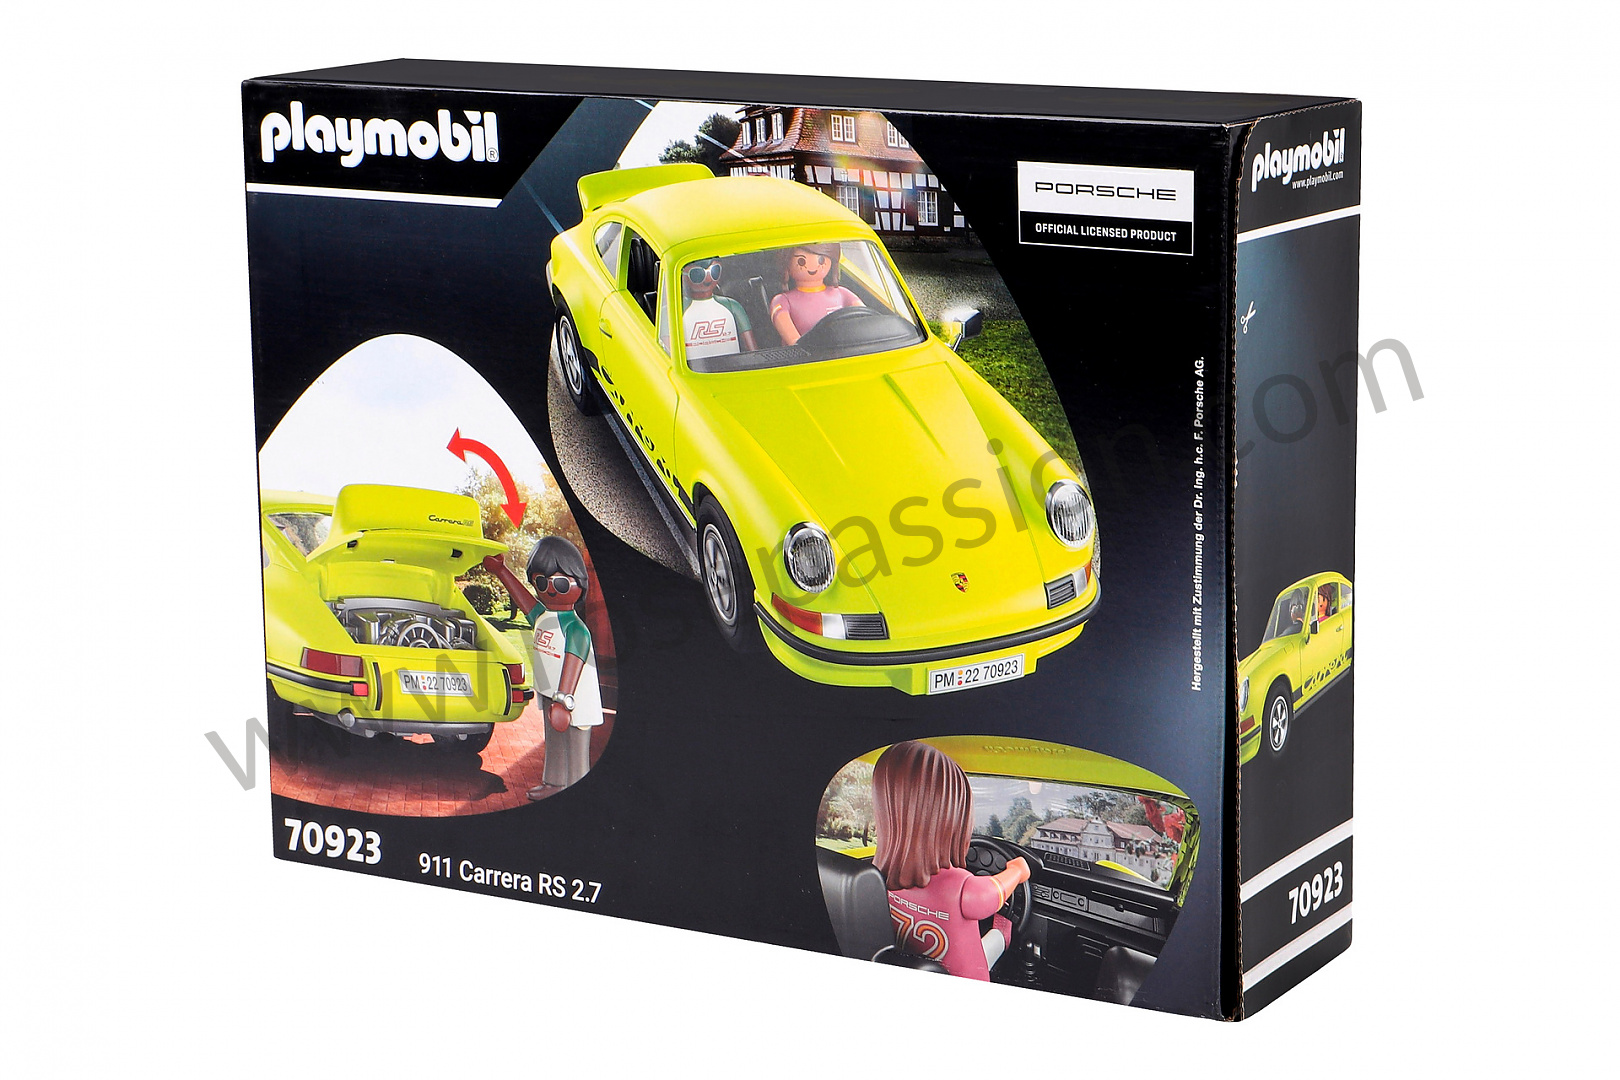 Playmobil Porsche 911 Carrera RS 2.7 70923 (for Kids 5 Years Old and Up)